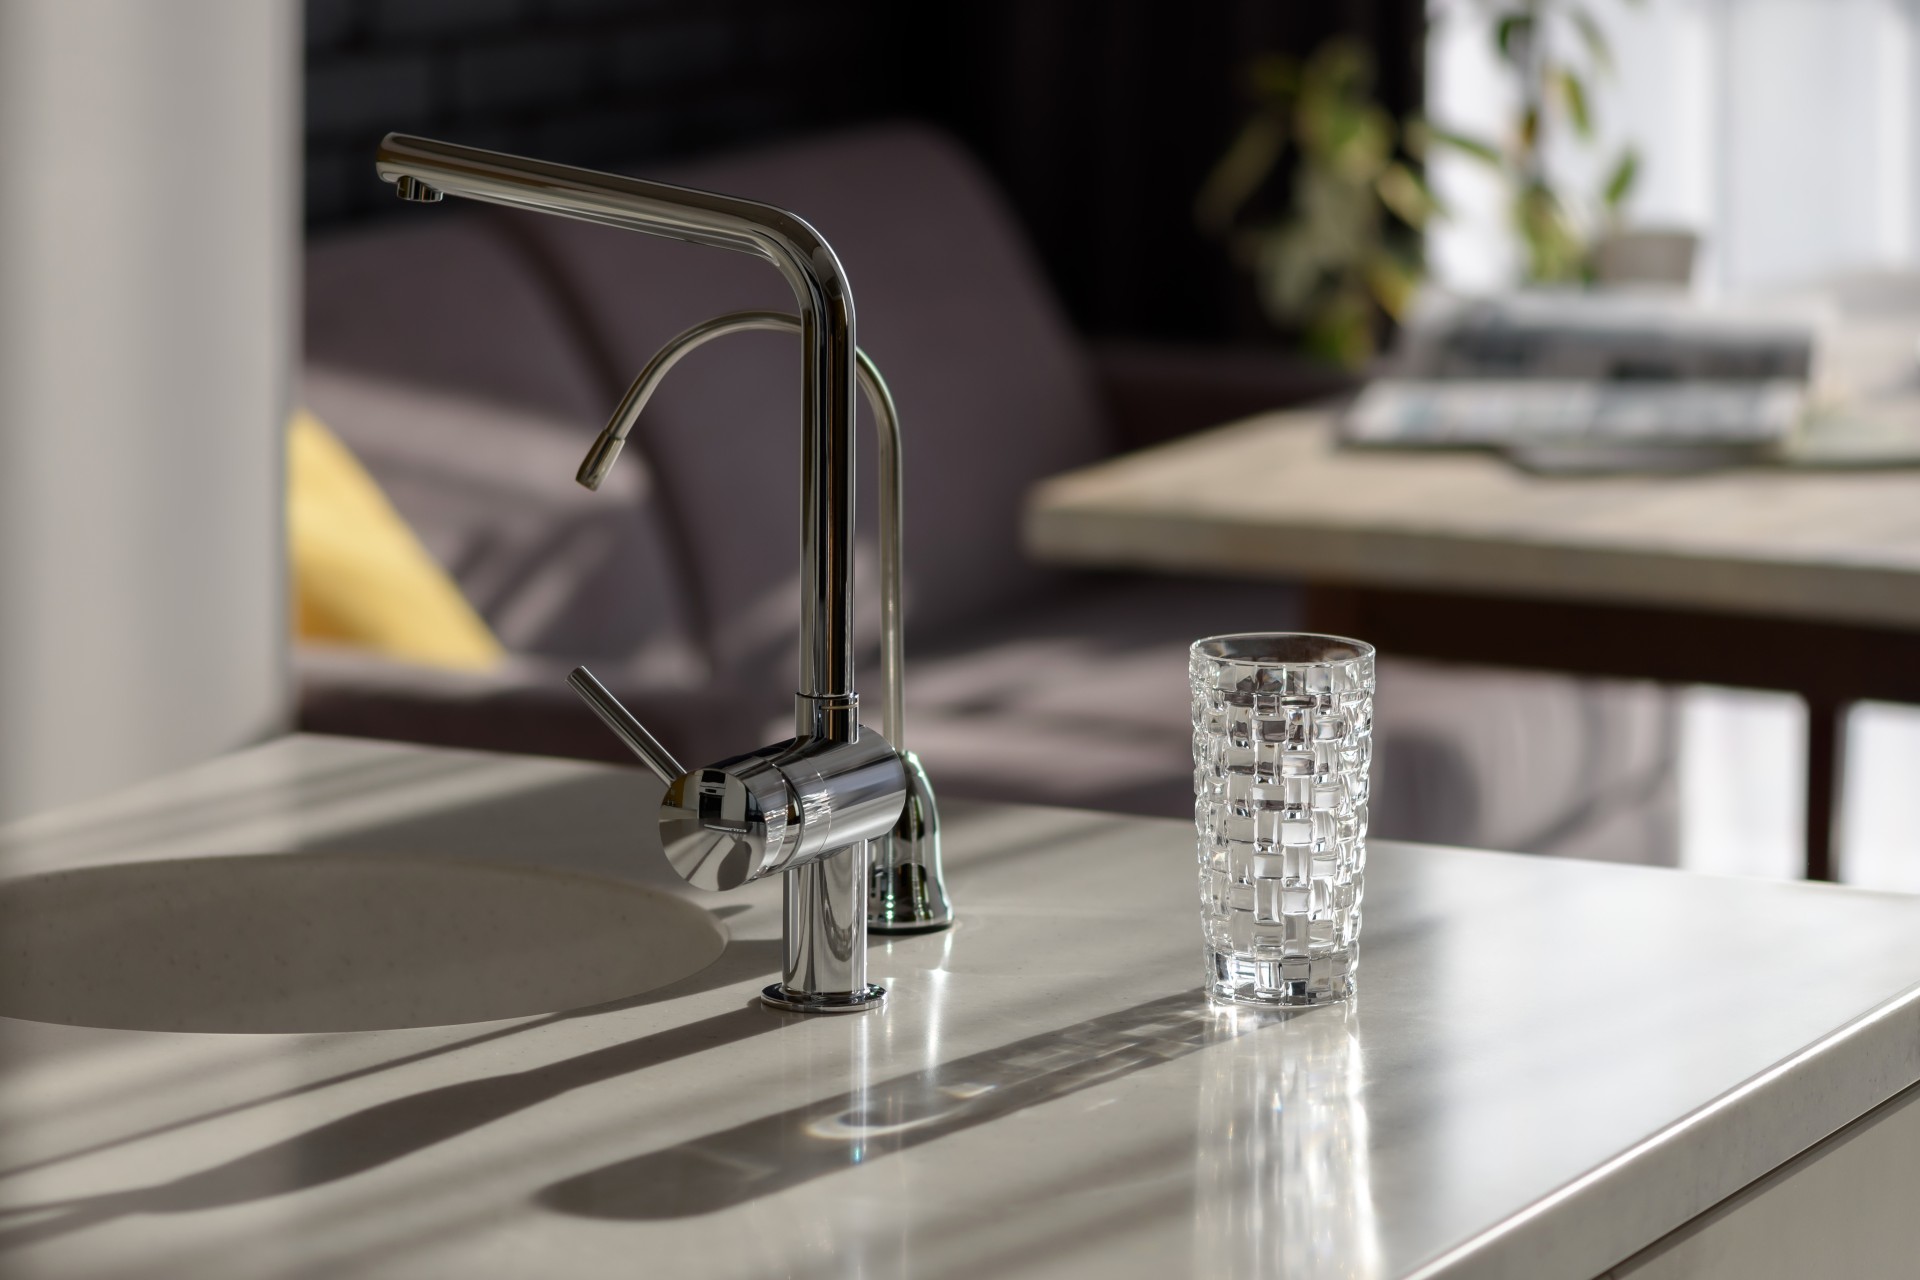 Glass of pure filtered water on the kitchen table in the rays of sunlight. Kitchen faucet and reverse osmosis faucet for water p